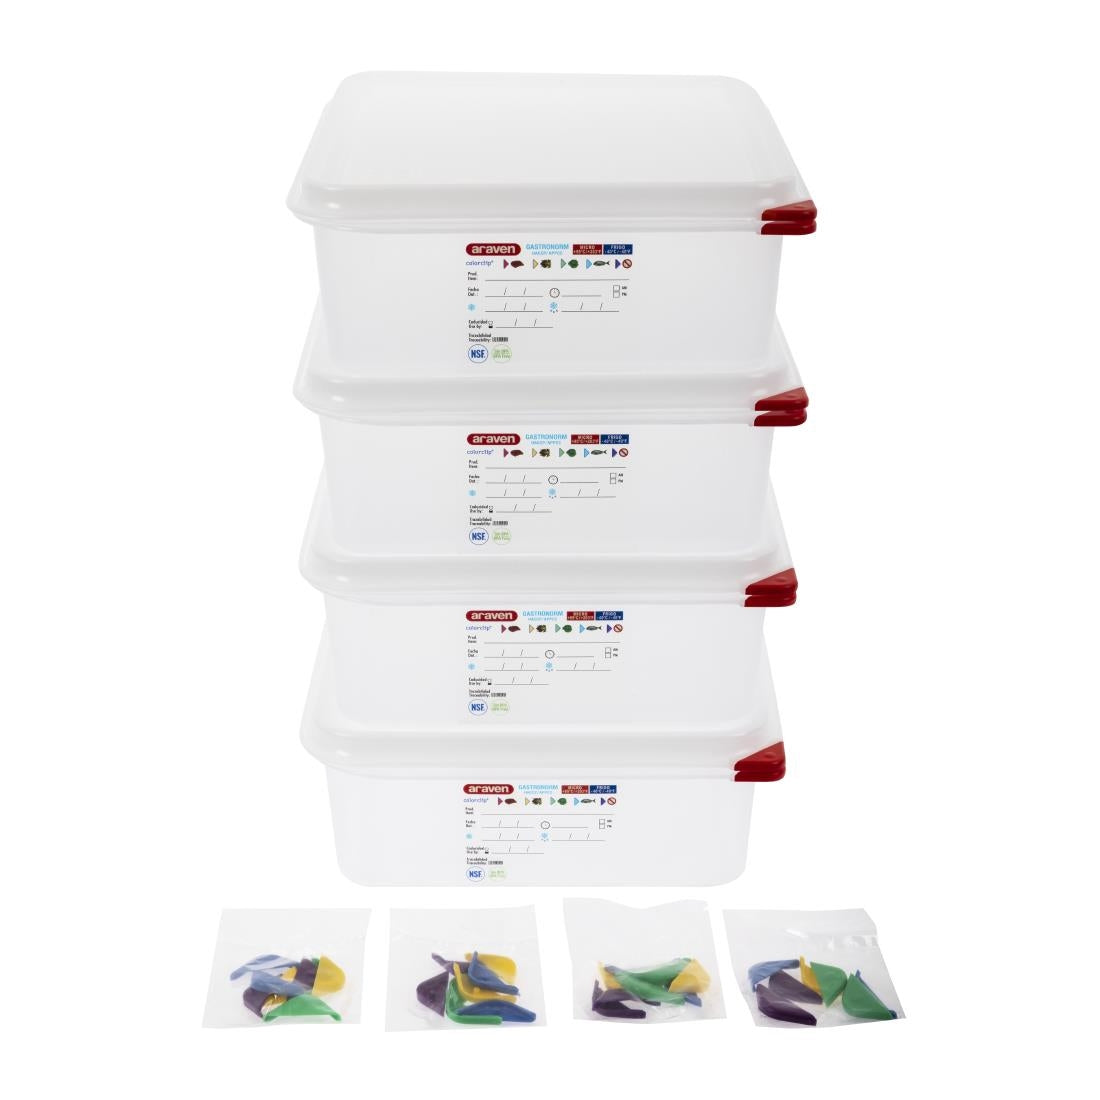 DL982 Araven Polypropylene 1/2 Gastronorm Food Container 6.5Ltr (Pack of 4) JD Catering Equipment Solutions Ltd